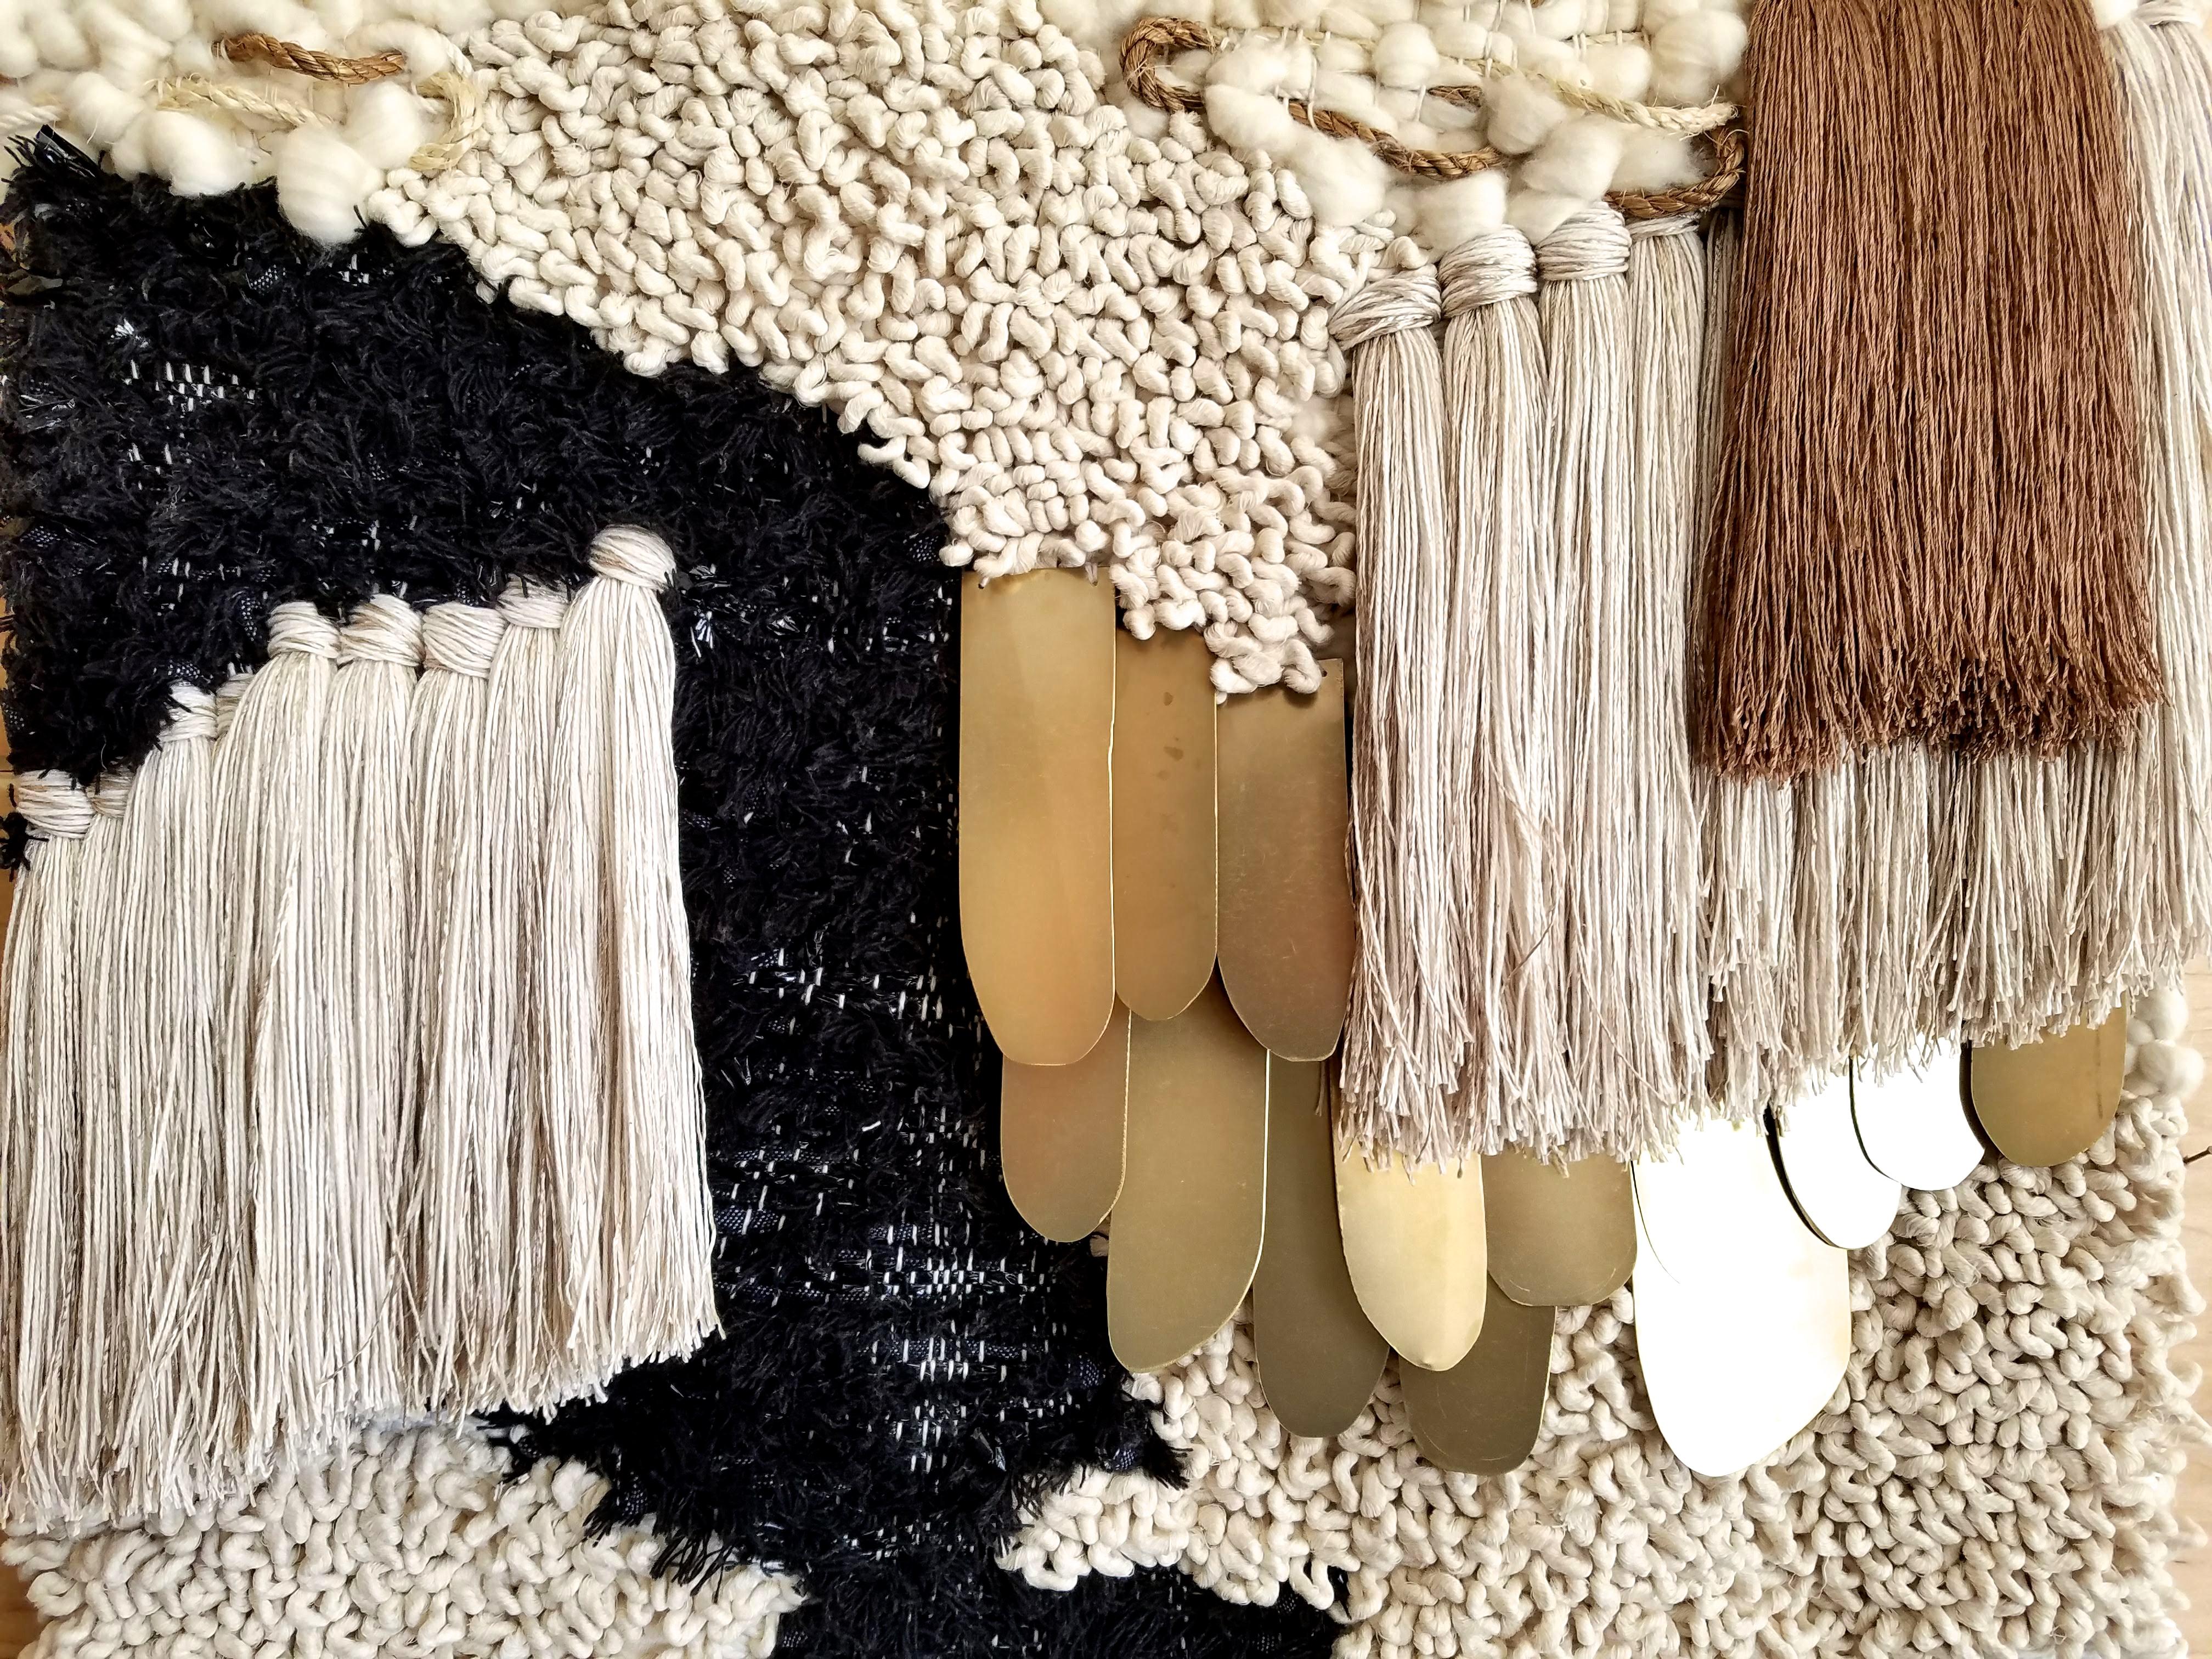 Handwoven, tapestry style, woven wall hanging by Janelle Pietrzak of All Roads. Neutral colors, shiny beige yarns, hand cut brass shapes and various types of ropes and natural fibers are used in this textile. Weaving hangs from a steel rod.

This